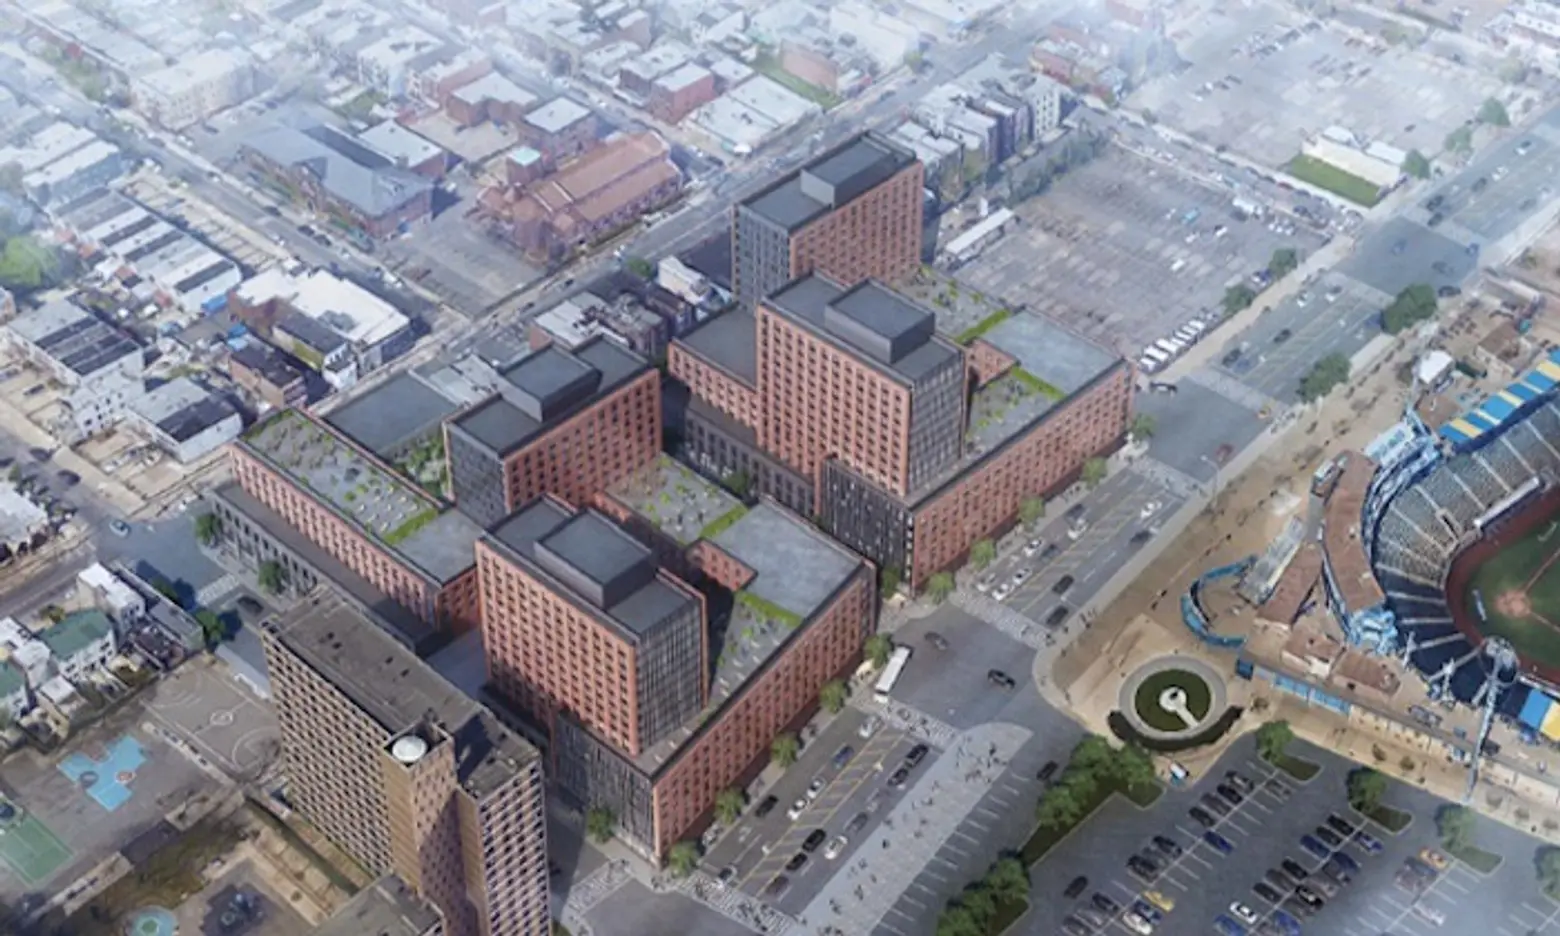 A massive 1,000-unit mixed-use project is planned right off the Coney Island boardwalk